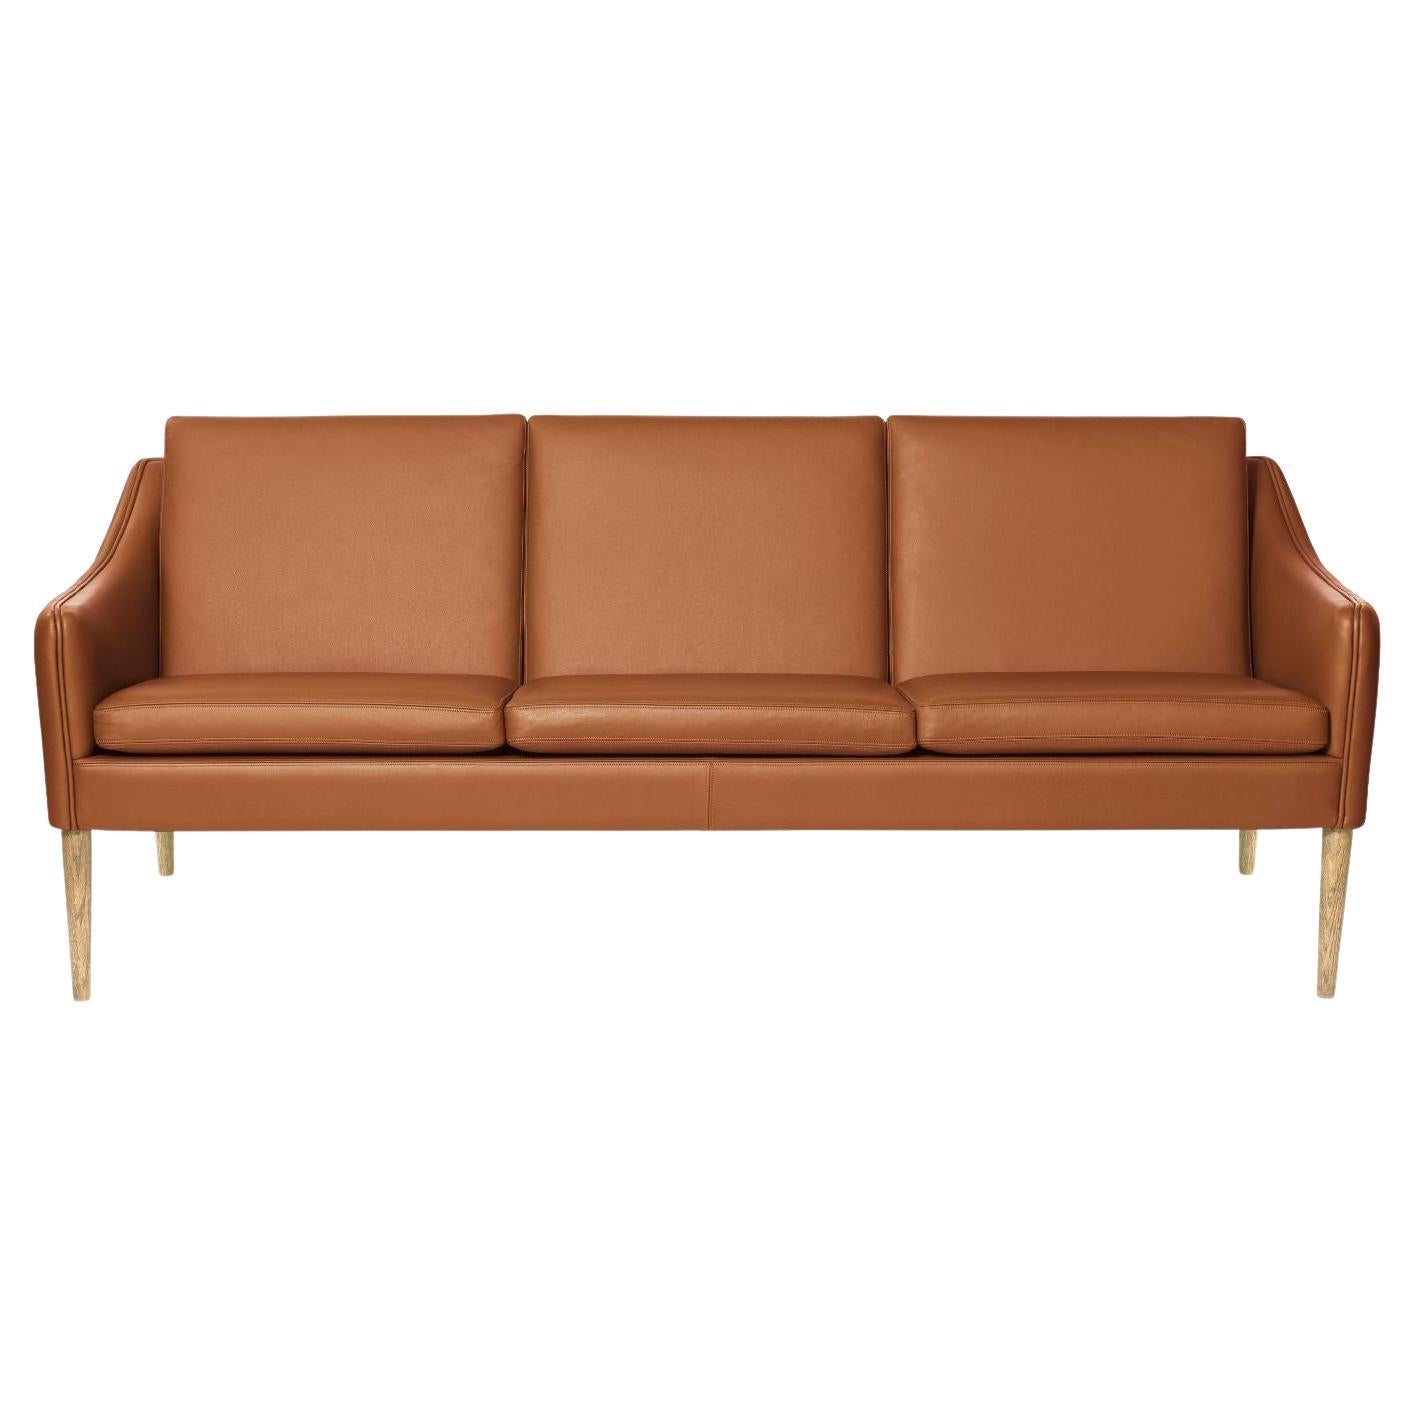 Mr Olsen 3 Seater Oak Challenger Cognac Leather by Warm Nordic For Sale